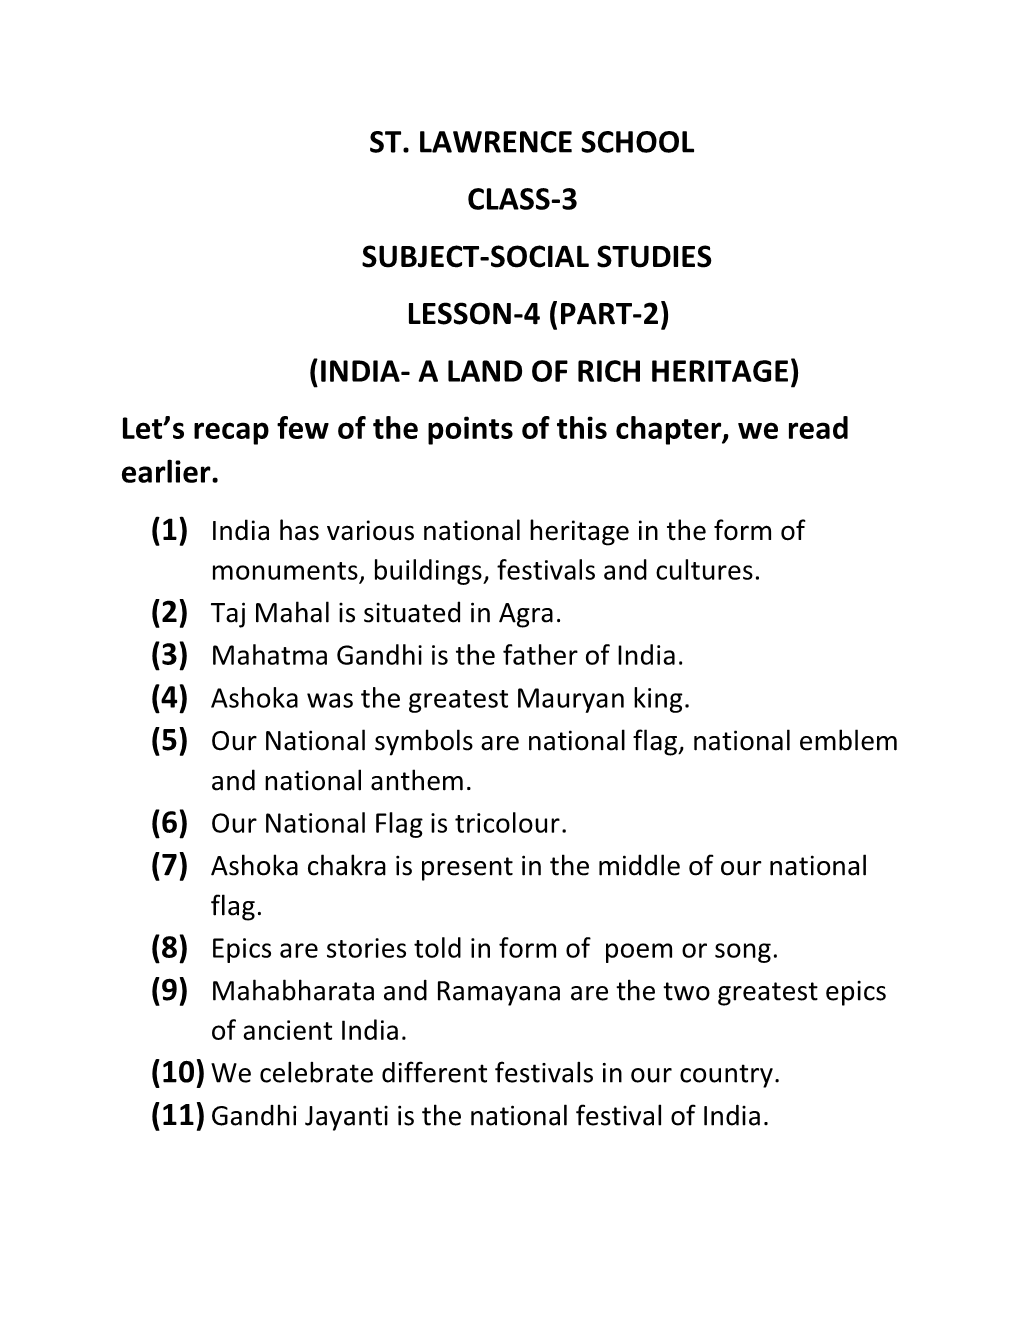 PART-2) (INDIA- a LAND of RICH HERITAGE) Let’S Recap Few of the Points of This Chapter, We Read Earlier